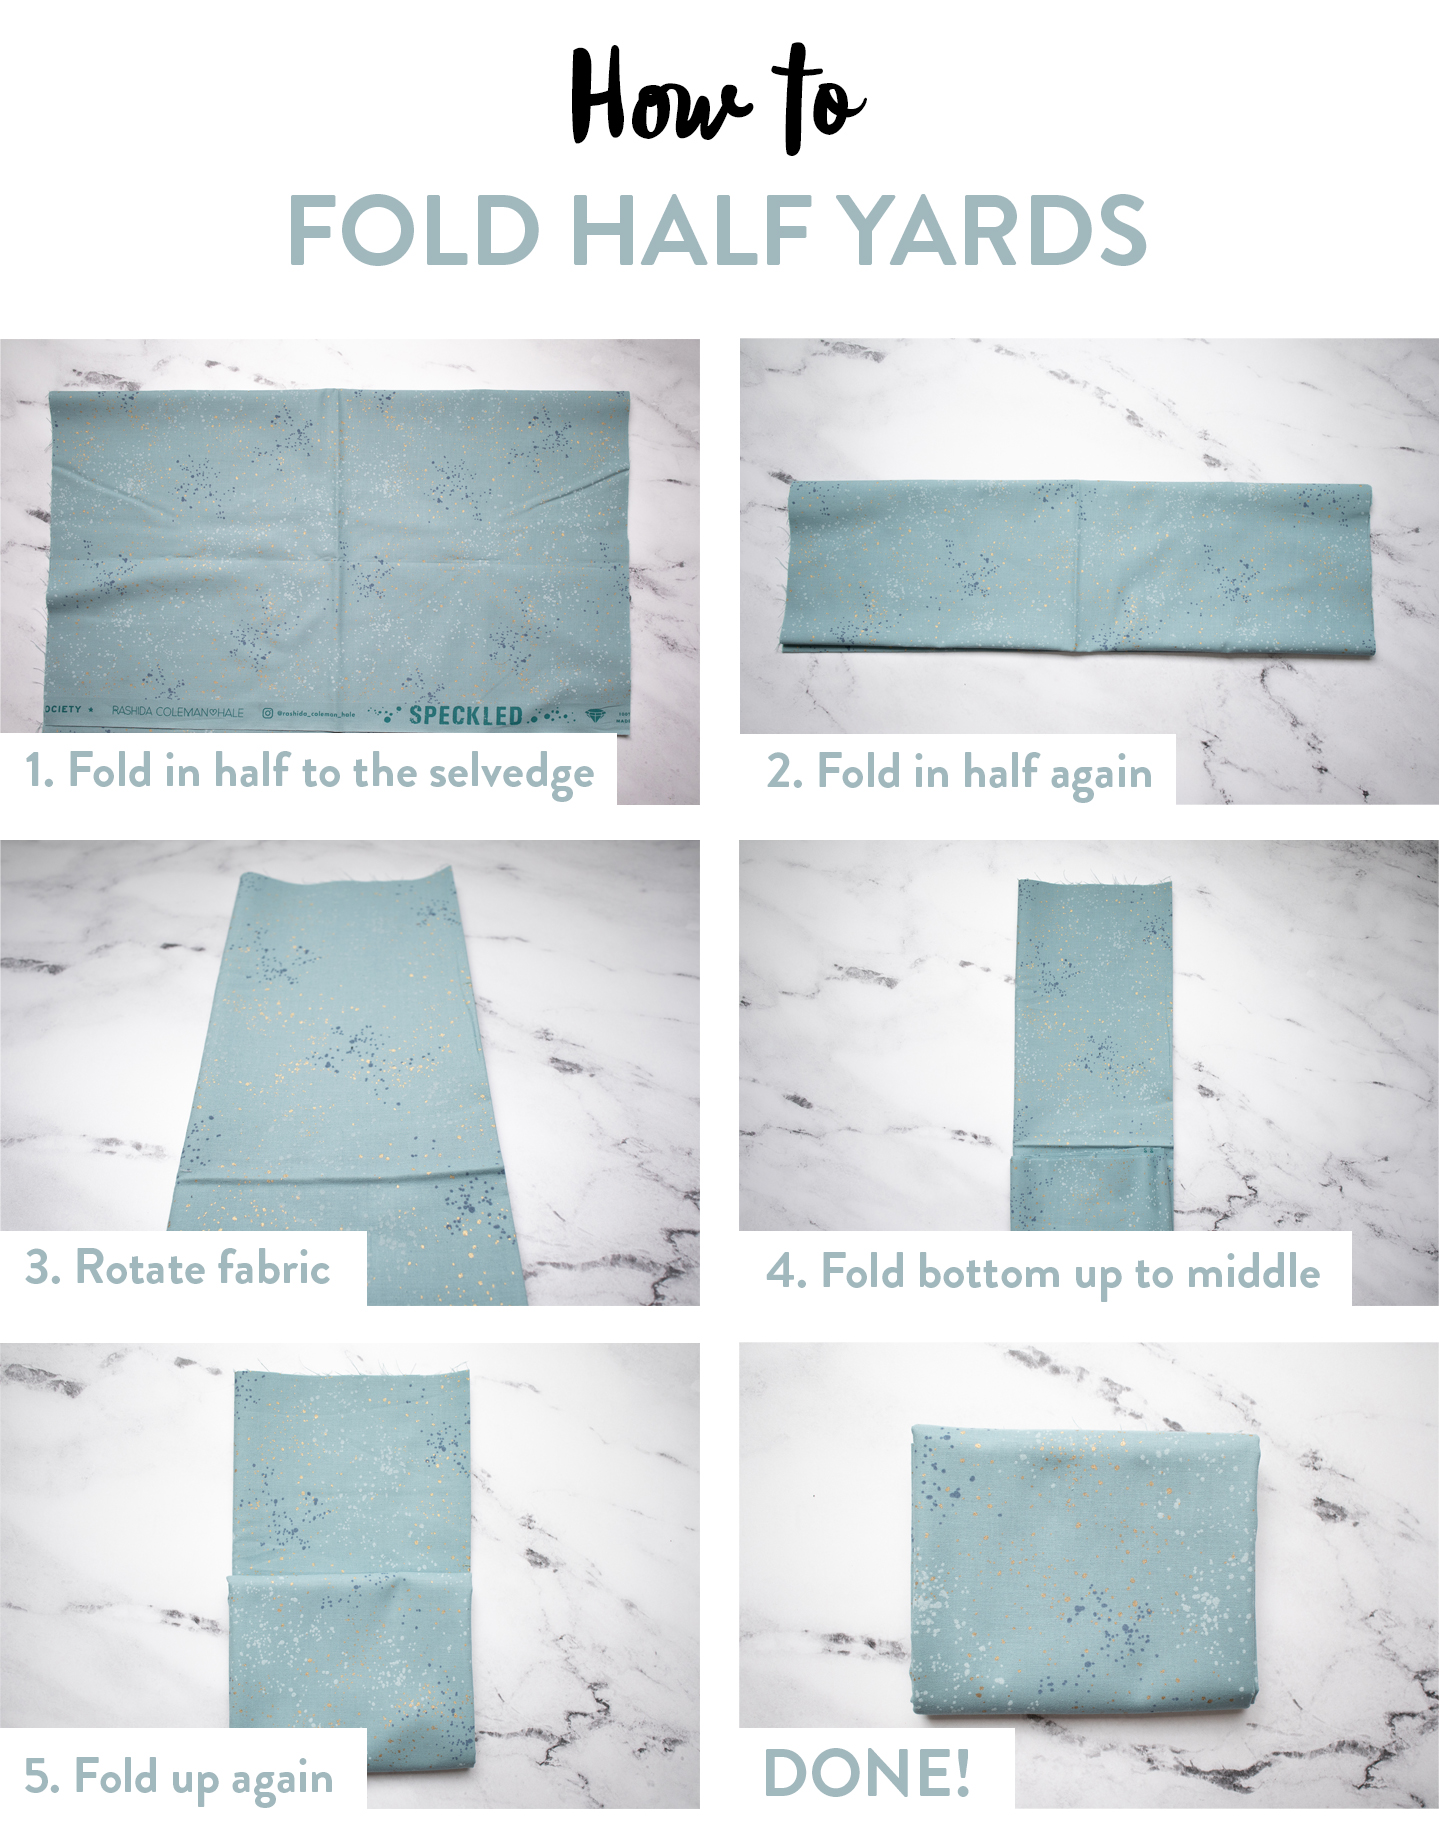 The ultimate guide to folding fabric of different sizes to neatly organize your fabric stash. Step by step photos and instructions show you how to fold fat quarters, half yards, and yardage so you can get started on cleaning your sewing studio.